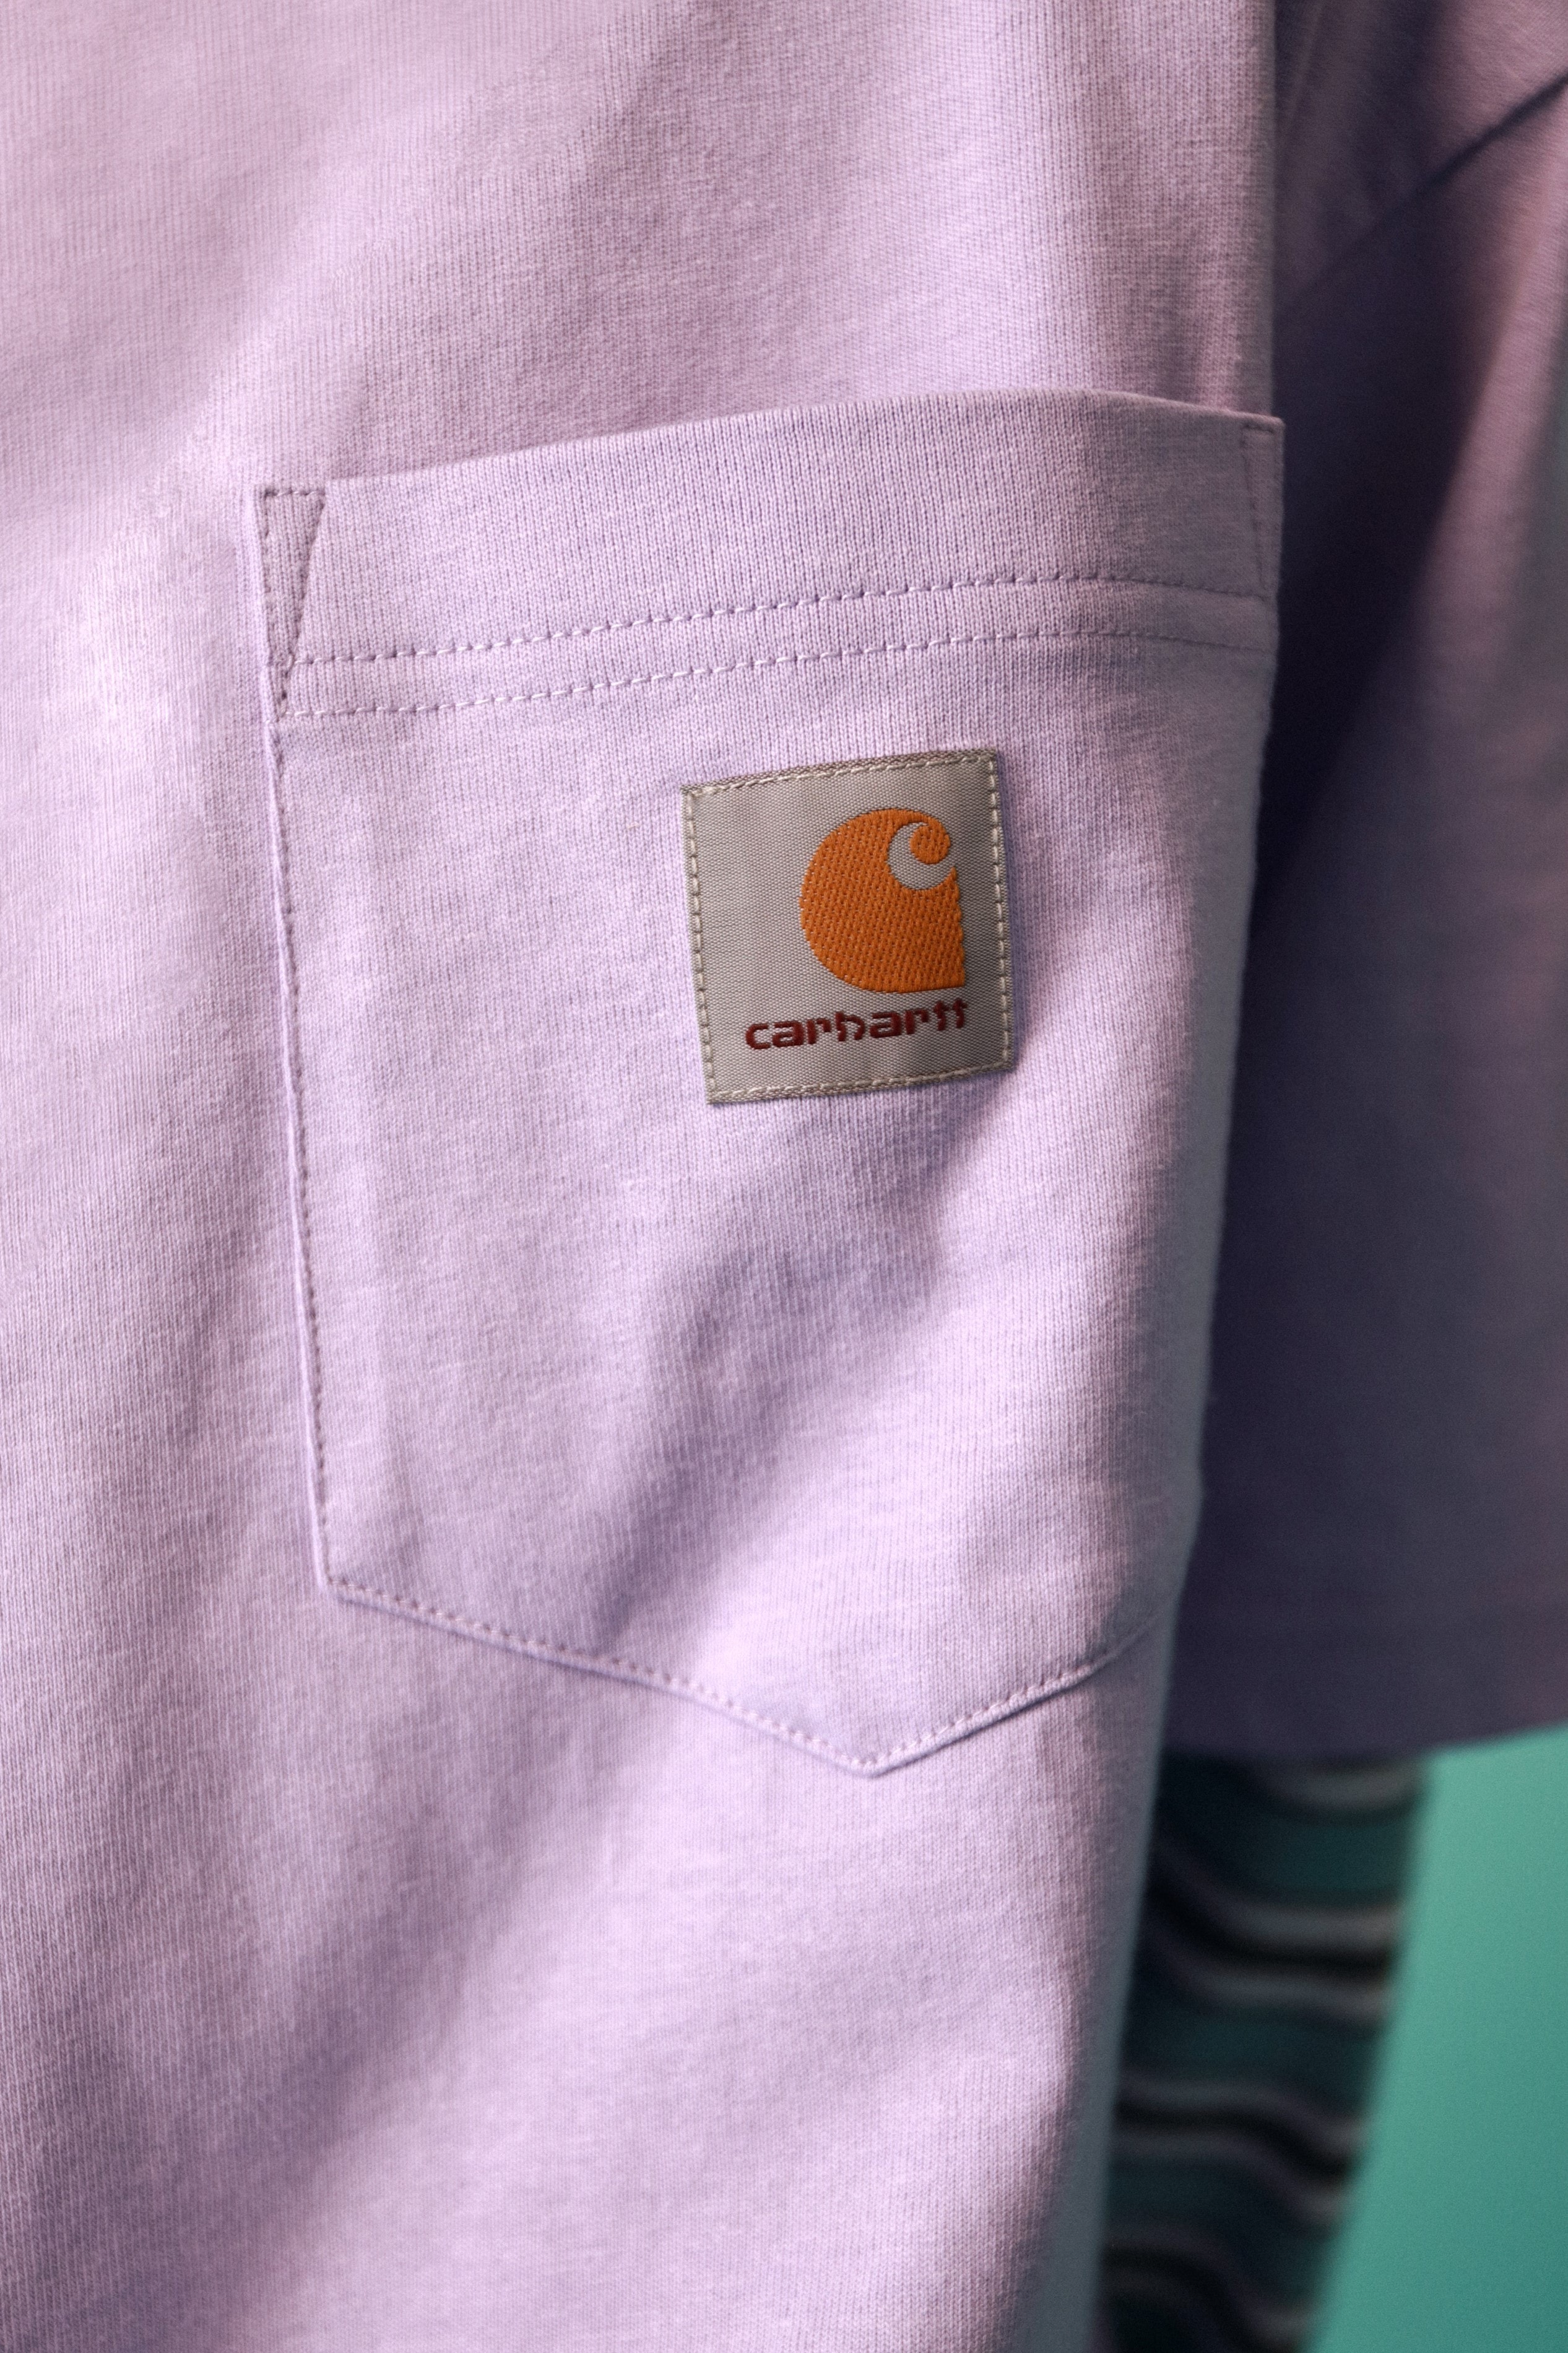 Carhartt WIP 最新 2019 春夏「Exclusive Capsule Collection」系列登場